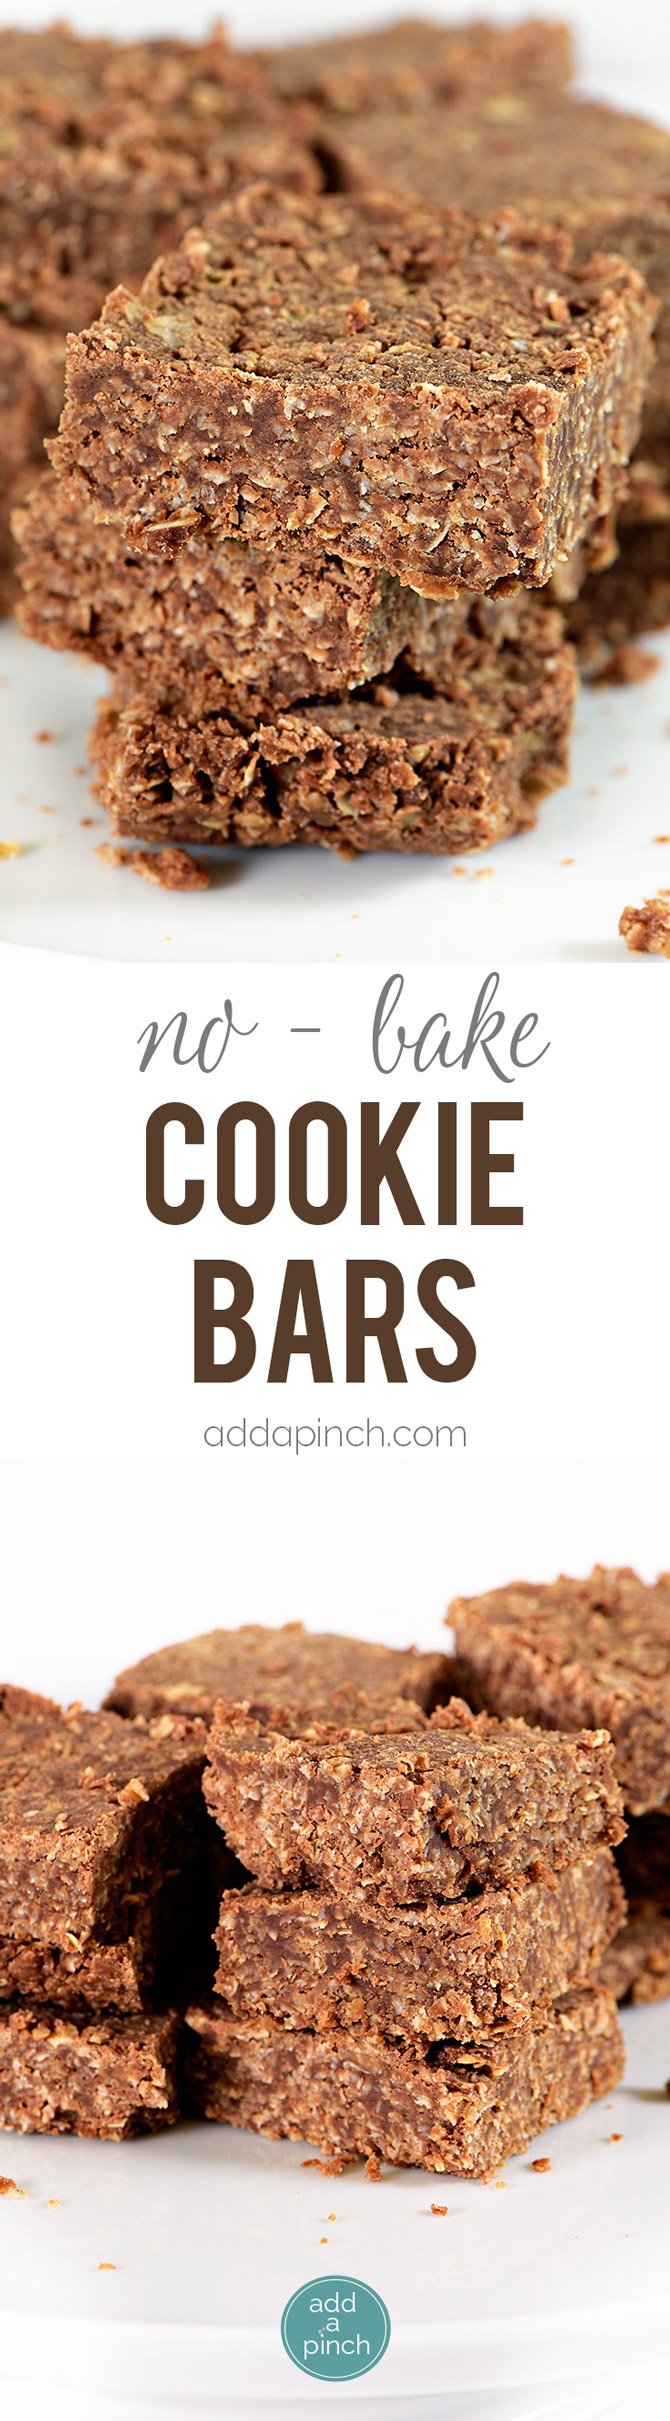 These No Bake Cookie Bars are so simple to make and even more delicious to eat! Made of oats, chocolate, and coconut, these no bake cookie bars are a favorite! 